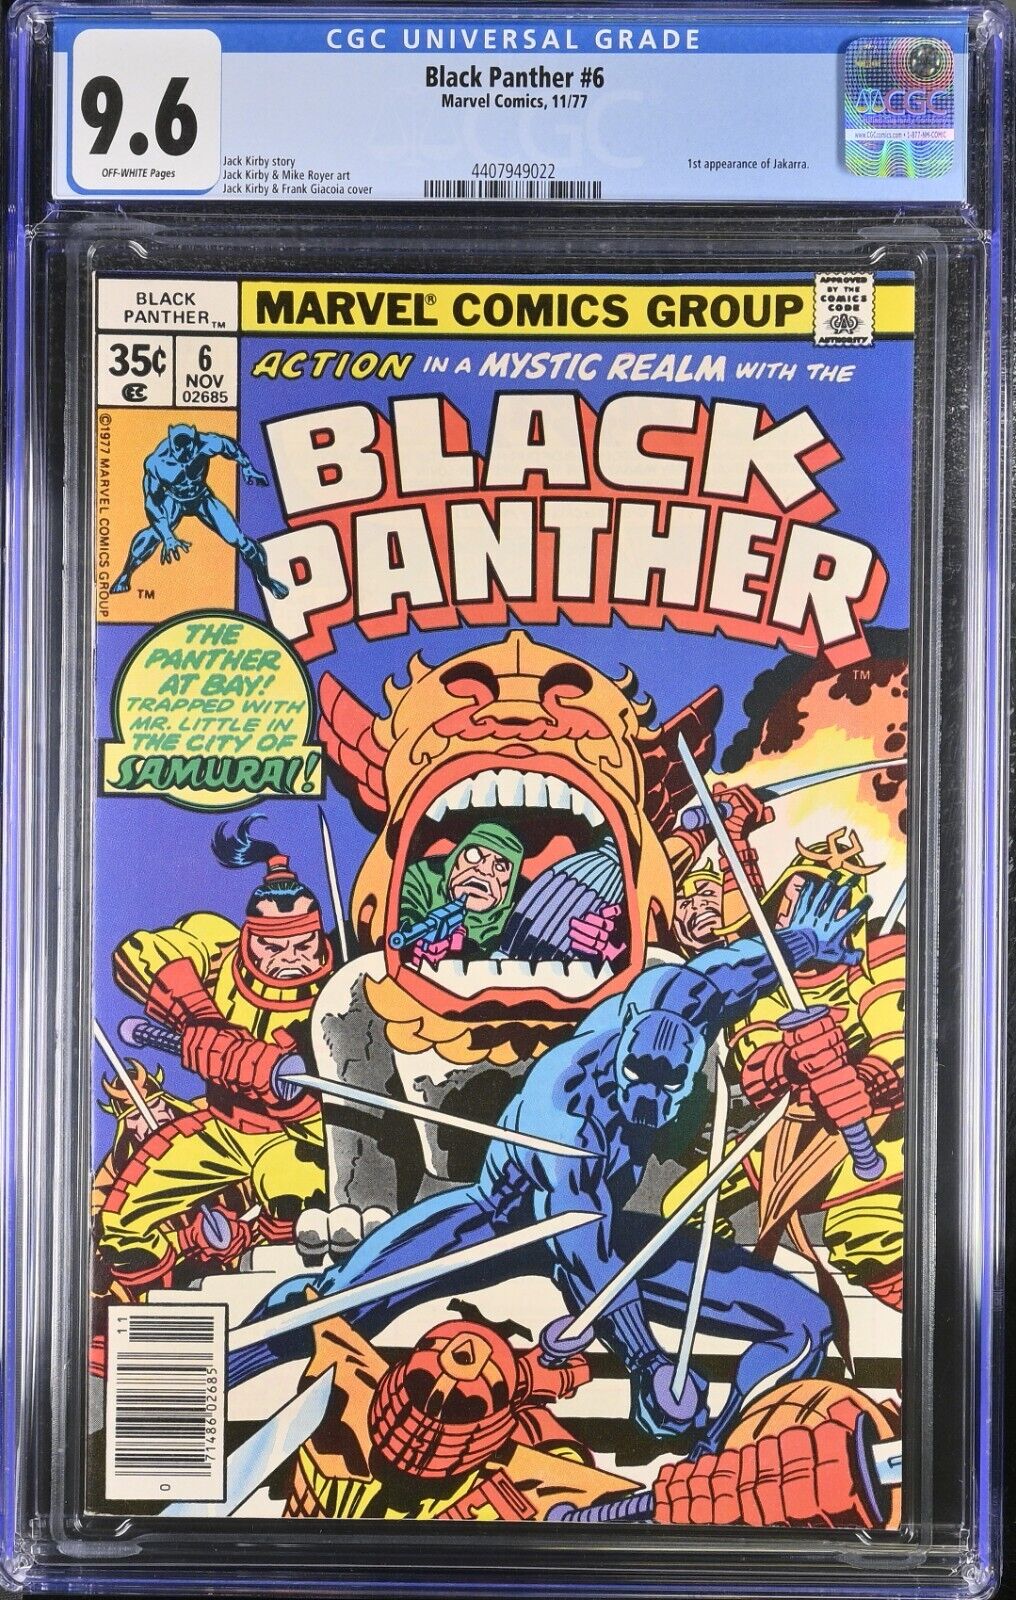 BLACK PANTHER #6 CGC 9.6 1ST APP OF JAKARRA MARVEL COMICS 1977 OW WHITE PAGES🔥